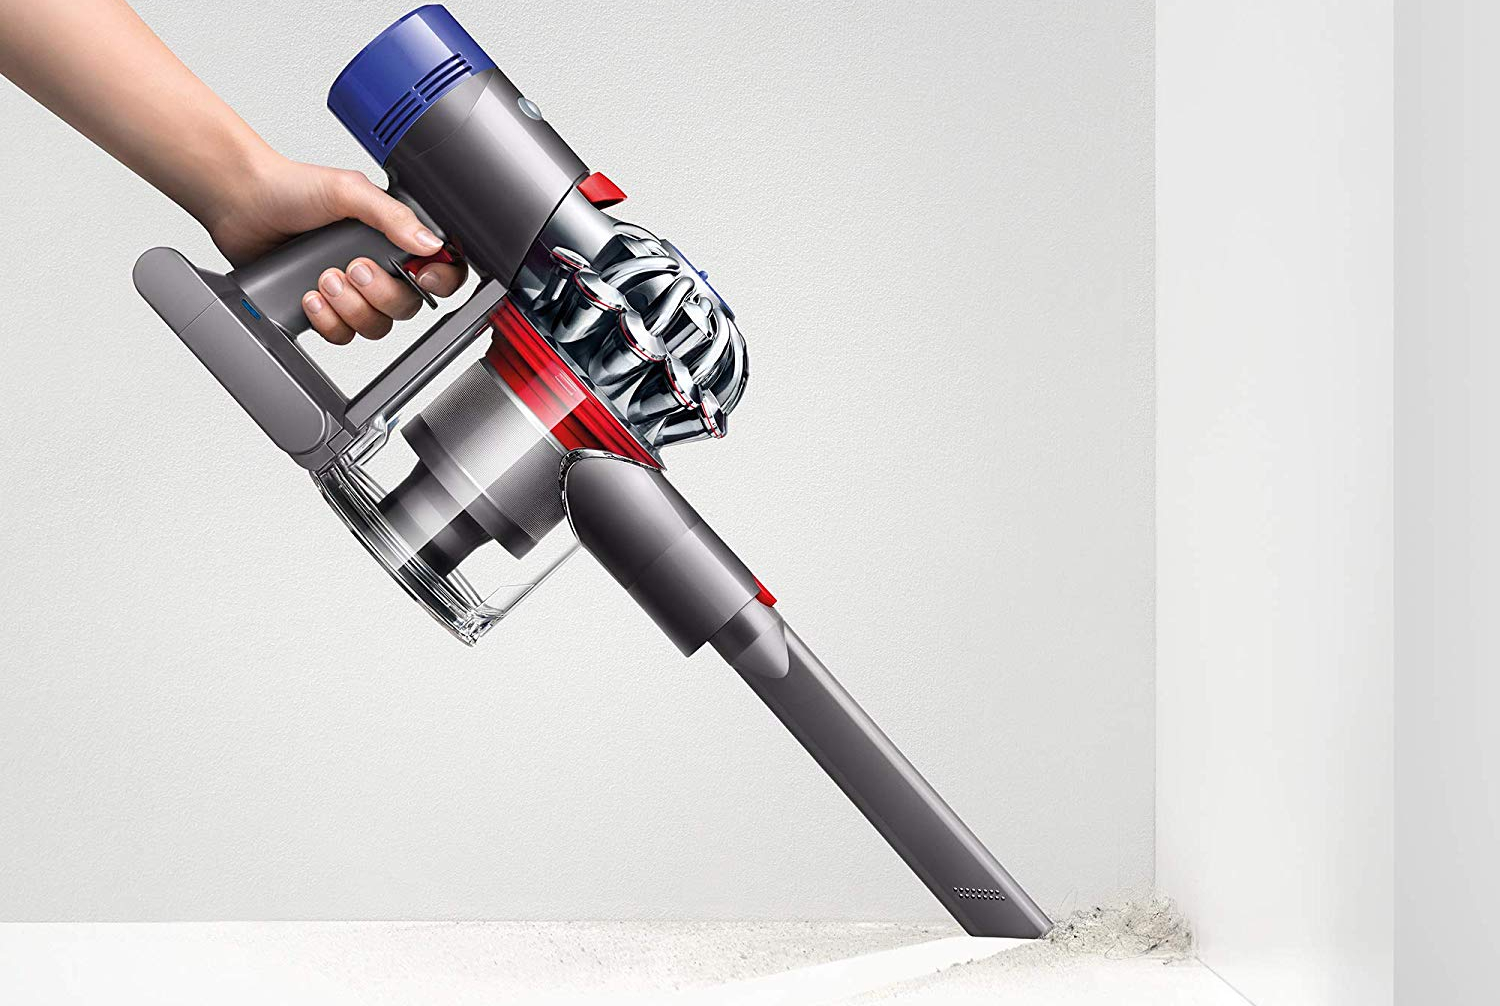 Amazon Drops the Price on Dyson V7 Animal Pro+ Cordless with Pet 